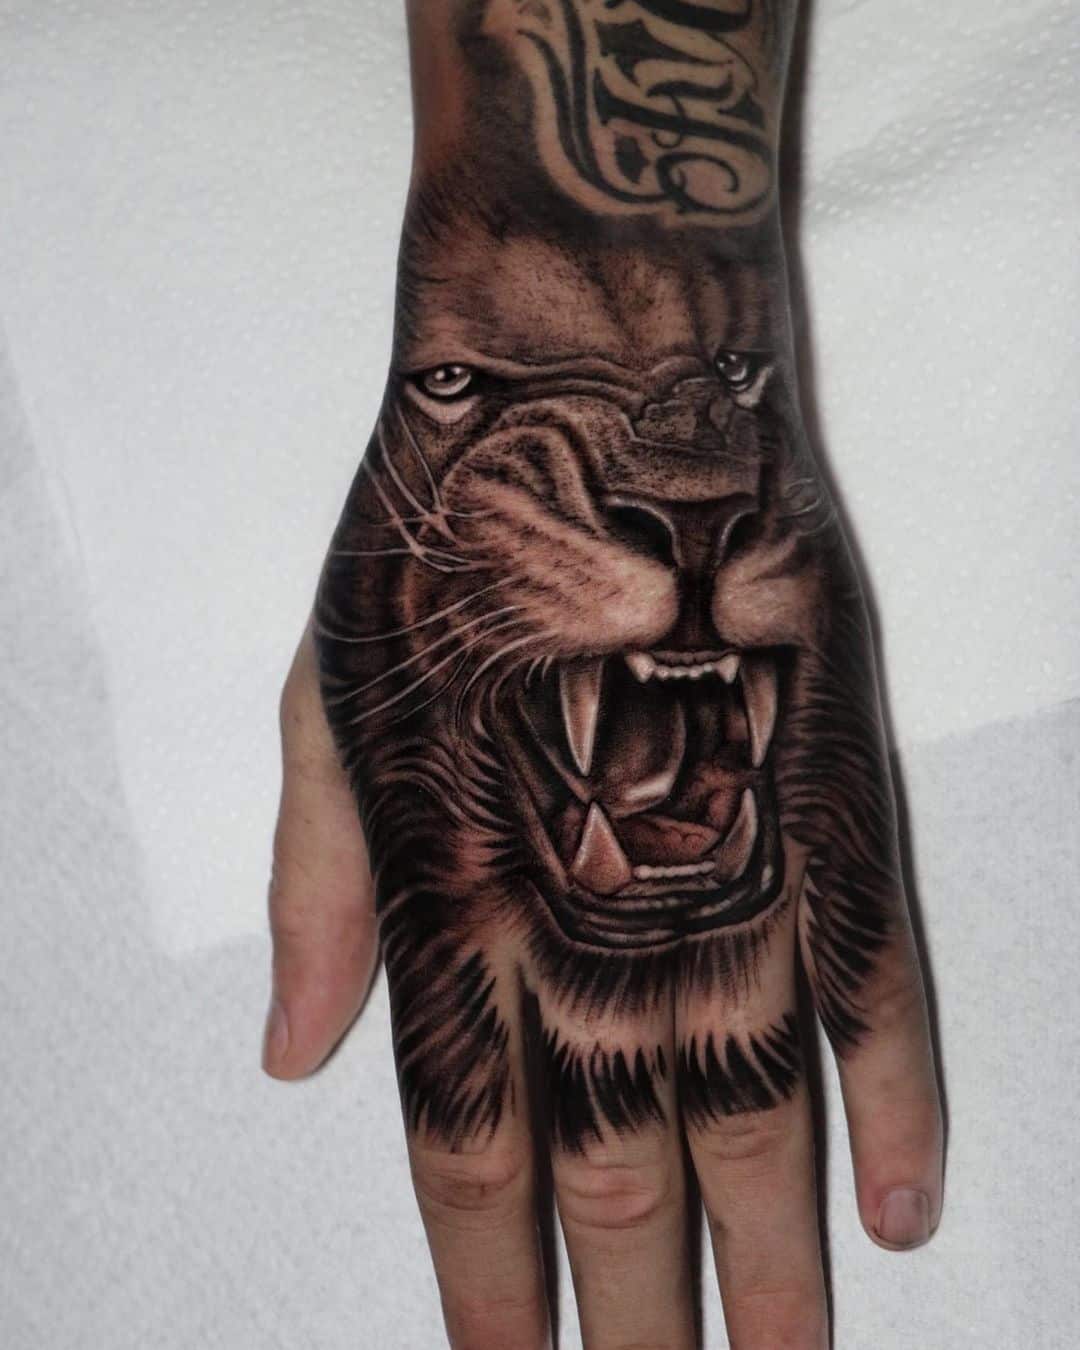 Black and gray lion tattoo on hand
